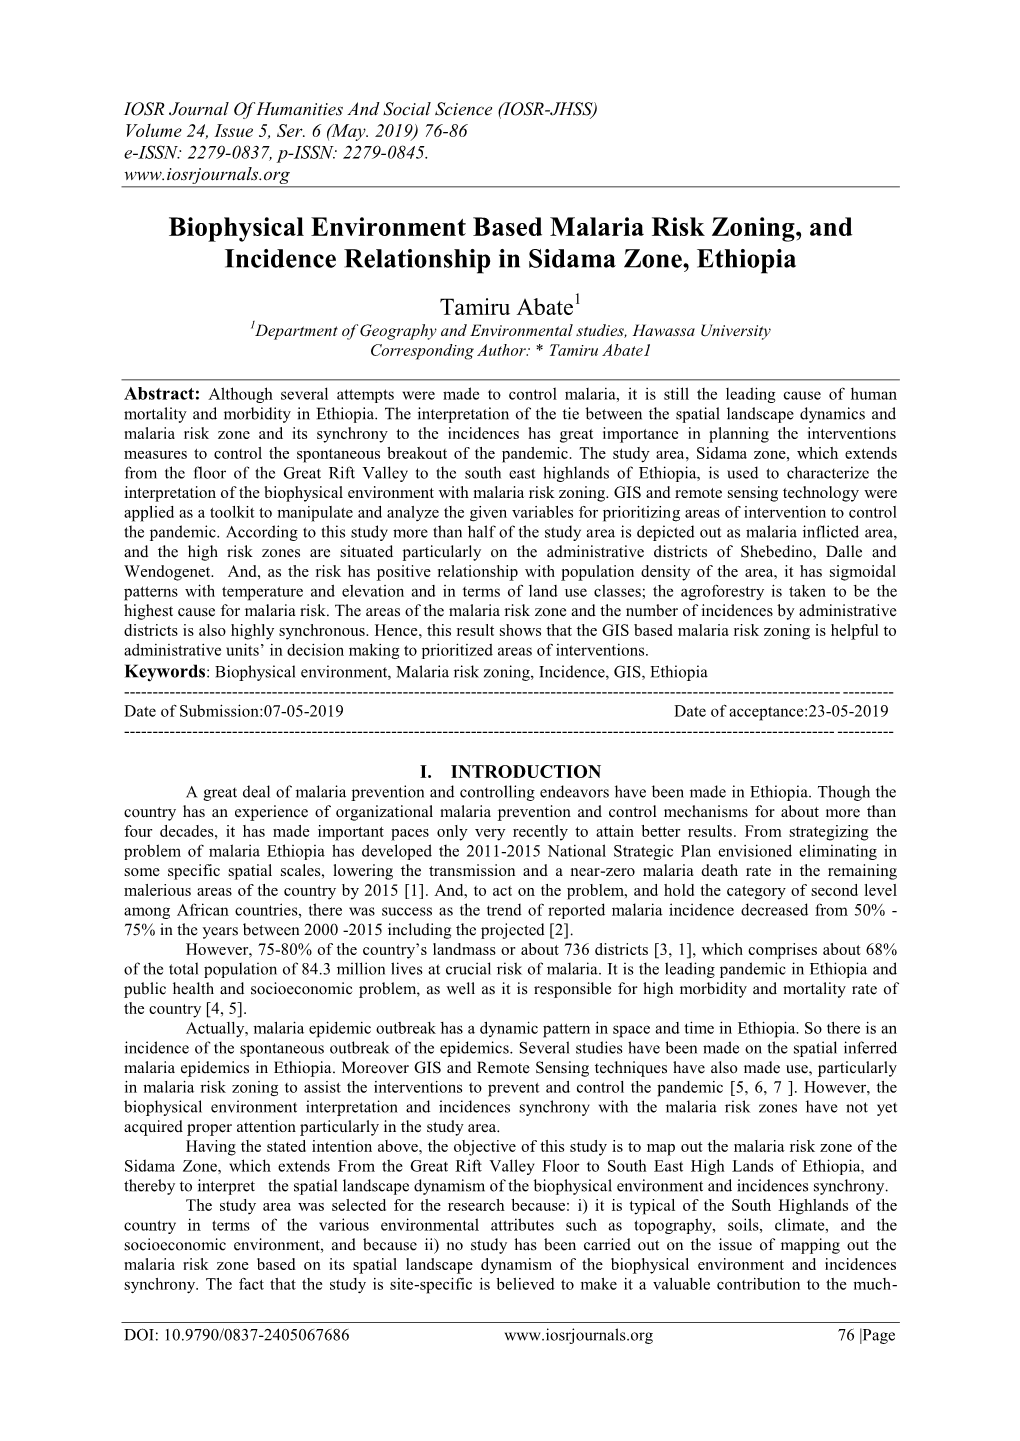 Biophysical Environment Based Malaria Risk Zoning, and Incidence Relationship in Sidama Zone, Ethiopia